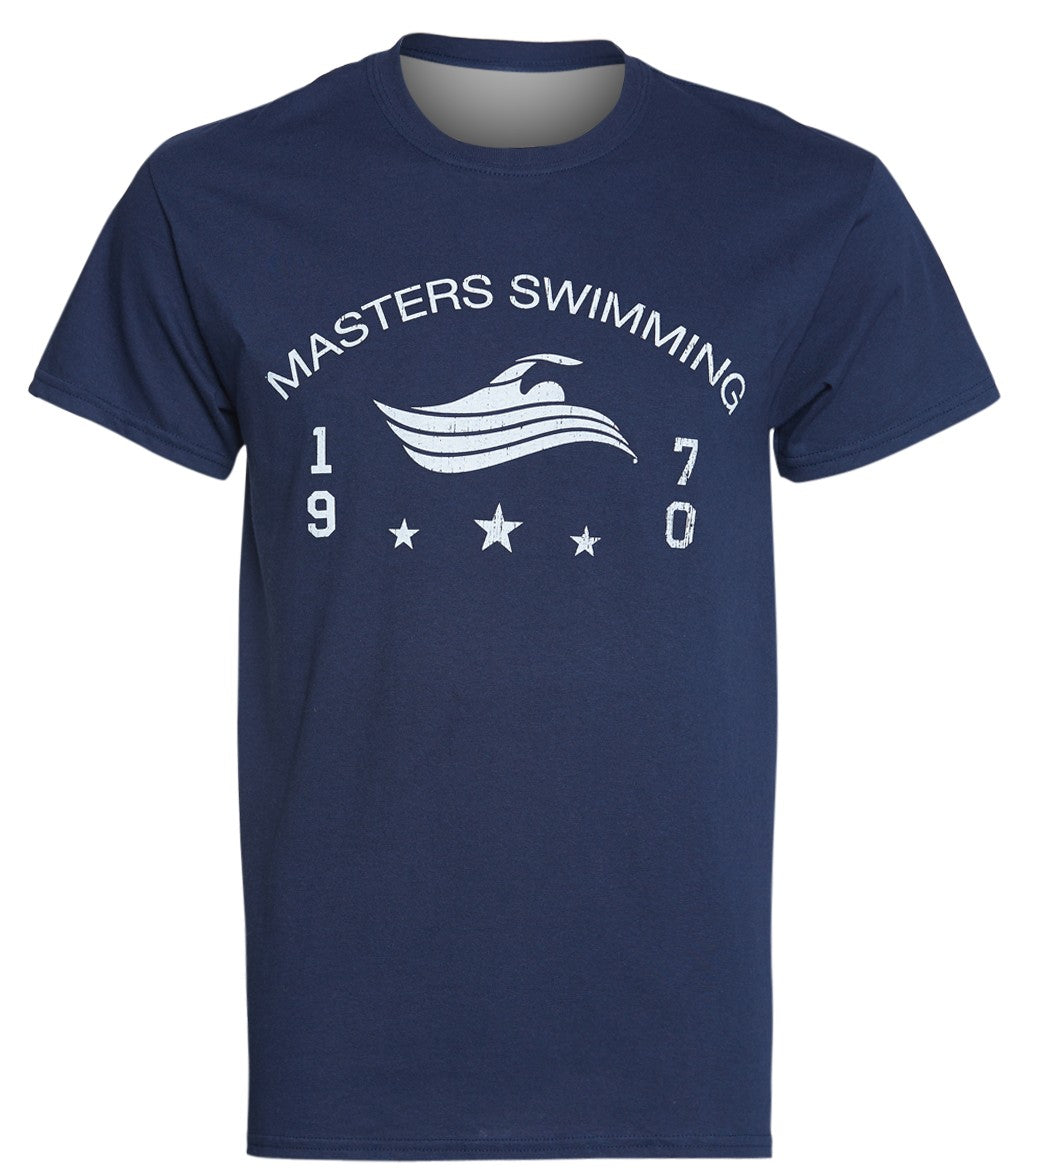 U.s. Masters Swimming Usms Men's Masters Swimming Distressed 1970 Crew Neck Tee Shirt - Navy Small Cotton - Swimoutlet.com